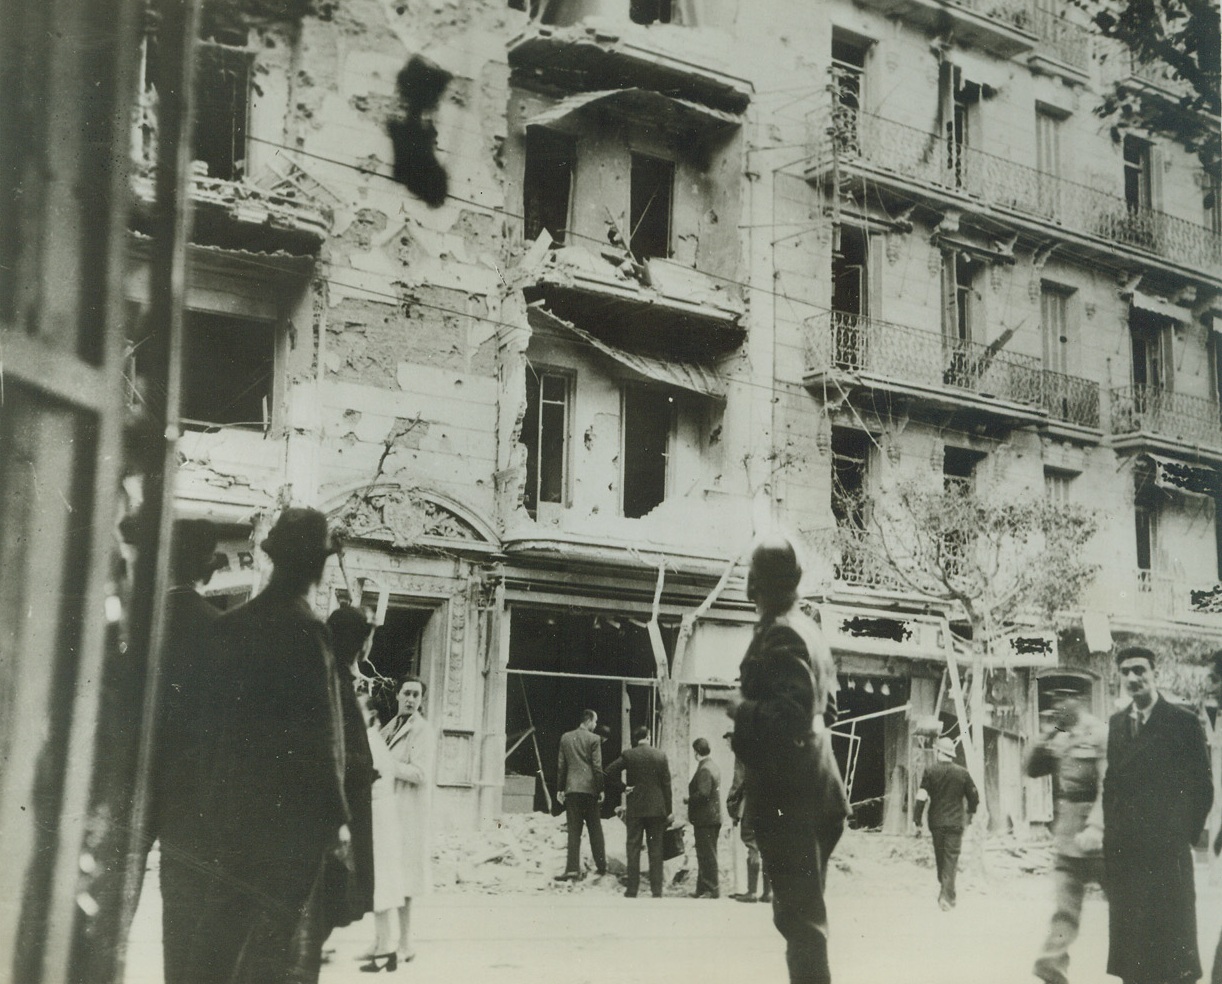 Nazi Raiders Damage Algiers, 12/13/1942. Algiers—Citizens of Algiers curiously inspect the damage done to a building during the first German raid on the territory following the occupation by Allied troops. The man wearing a helmet and arm badge, about to enter the least-damaged building, apparently is a civilian air raid warden. Credit: ACME.;